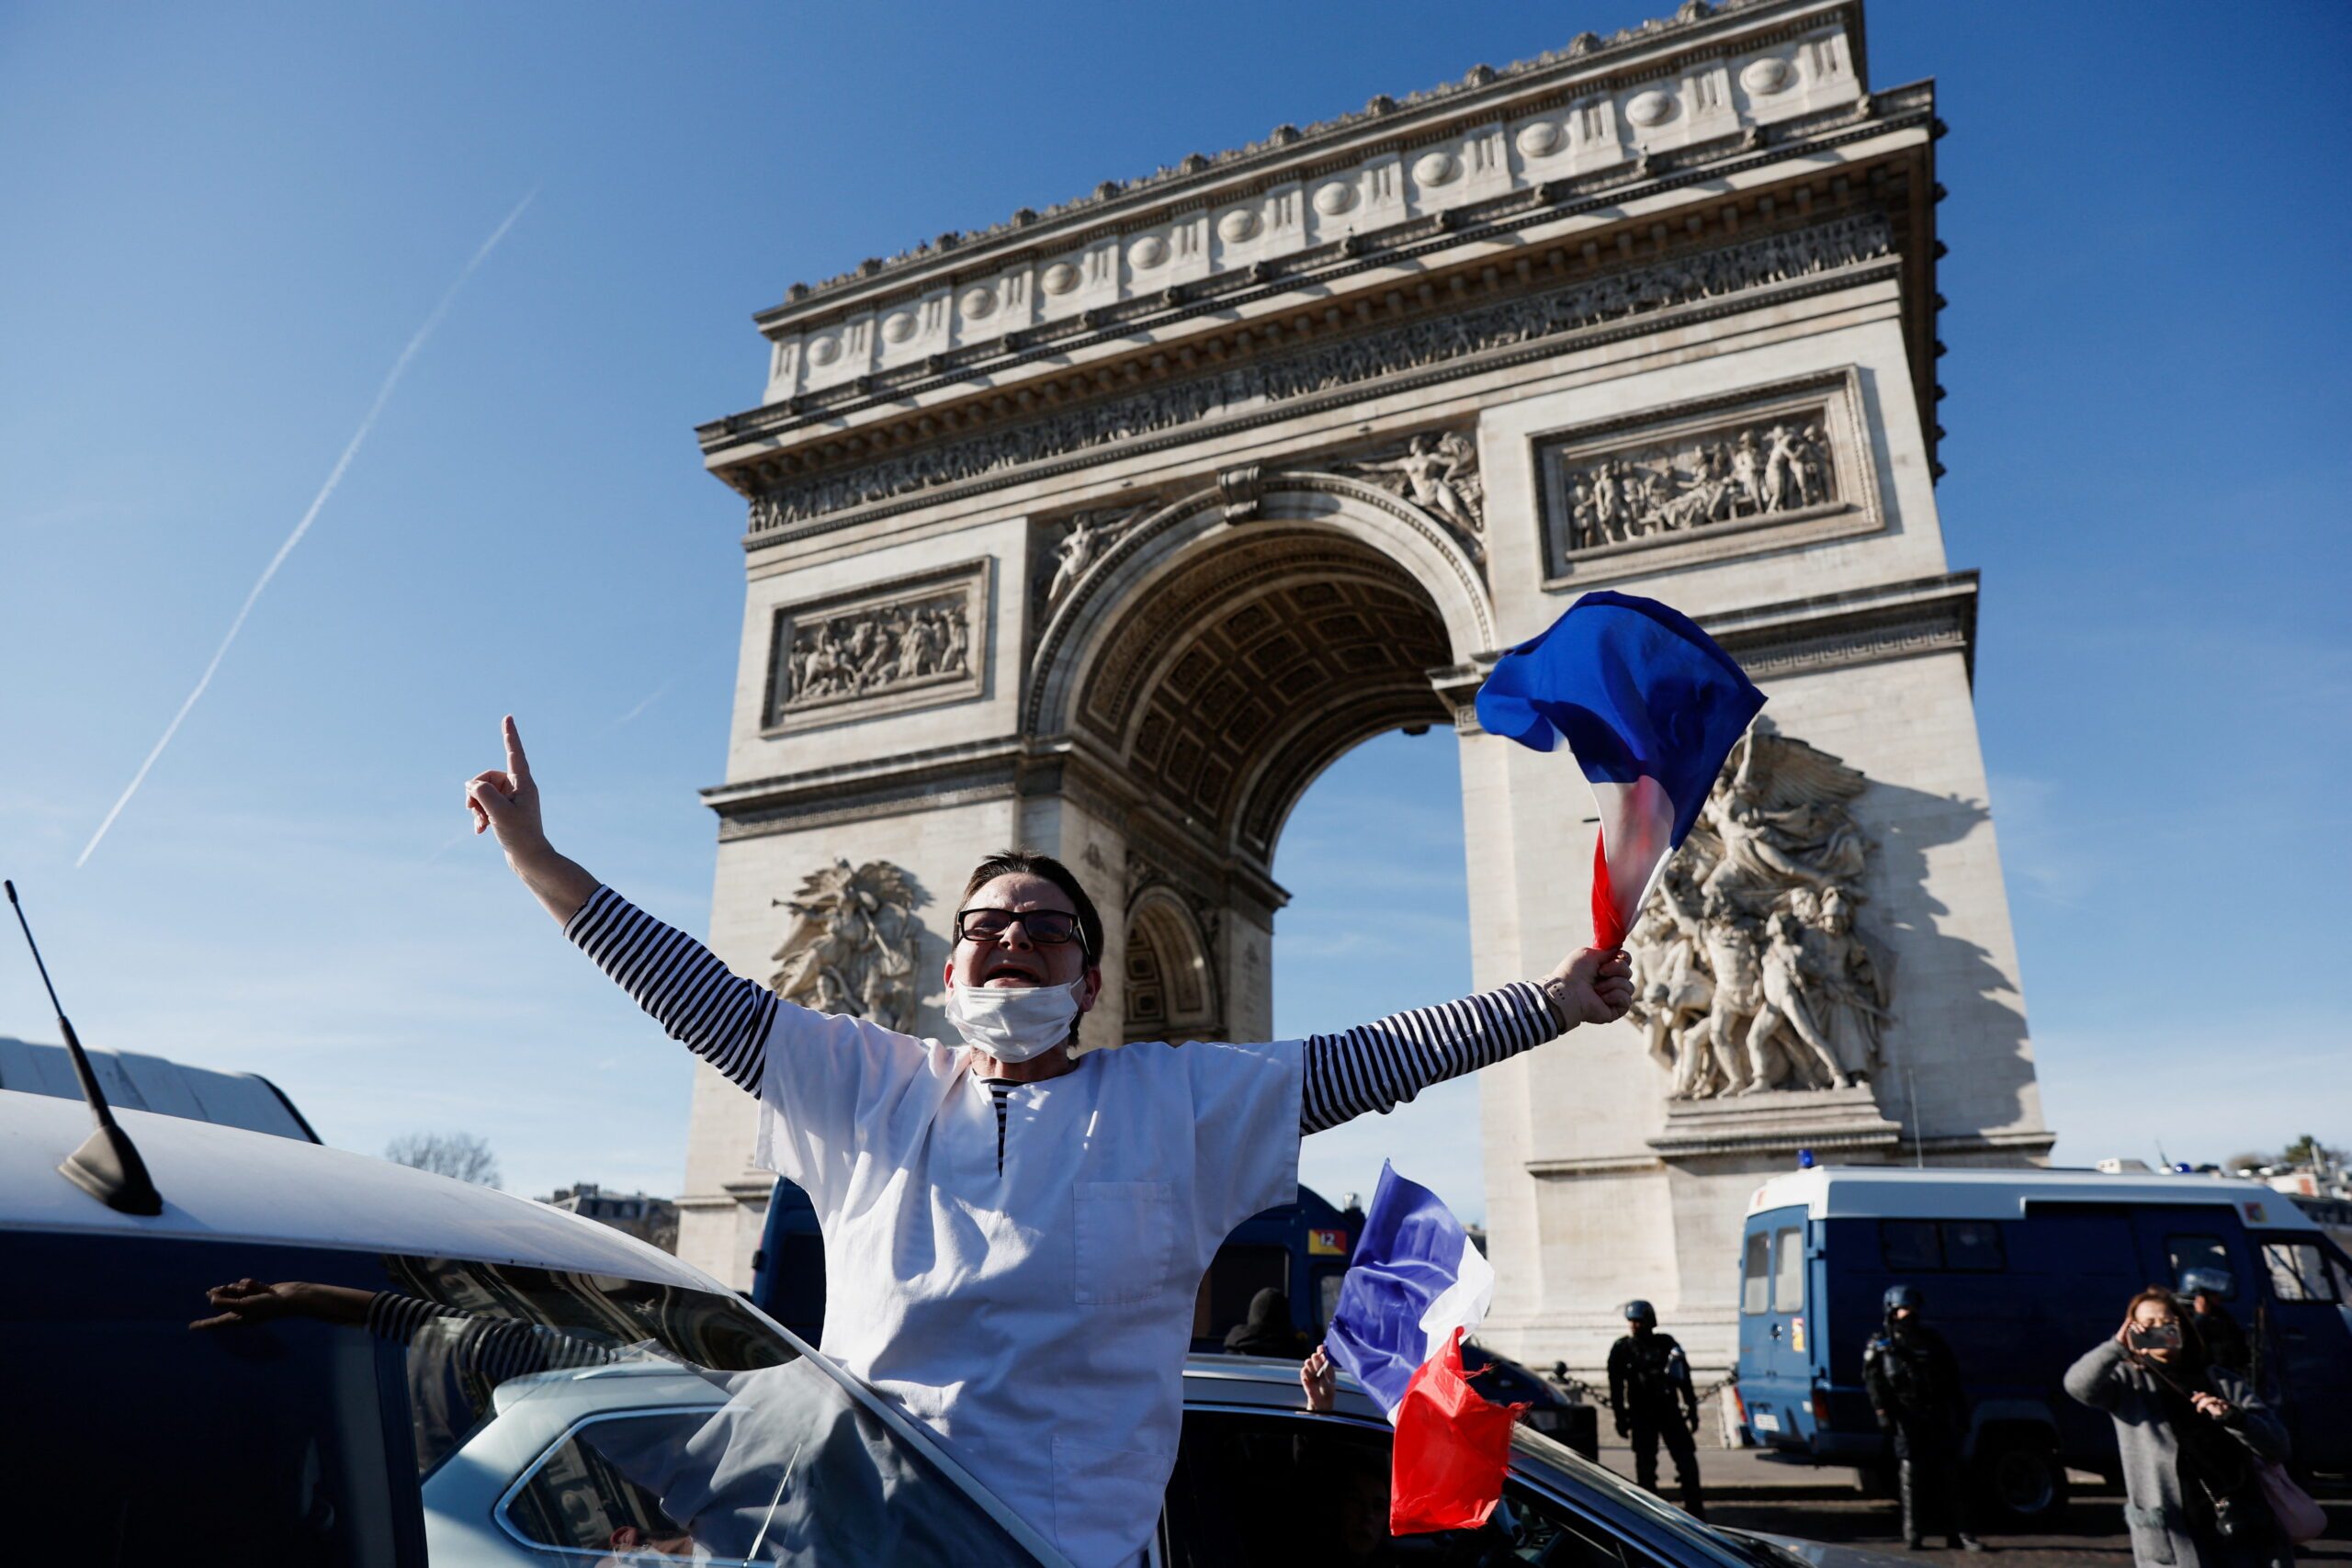 Police fire tear gas as anti-restrictions ‘Freedom Convoy’ enters Paris